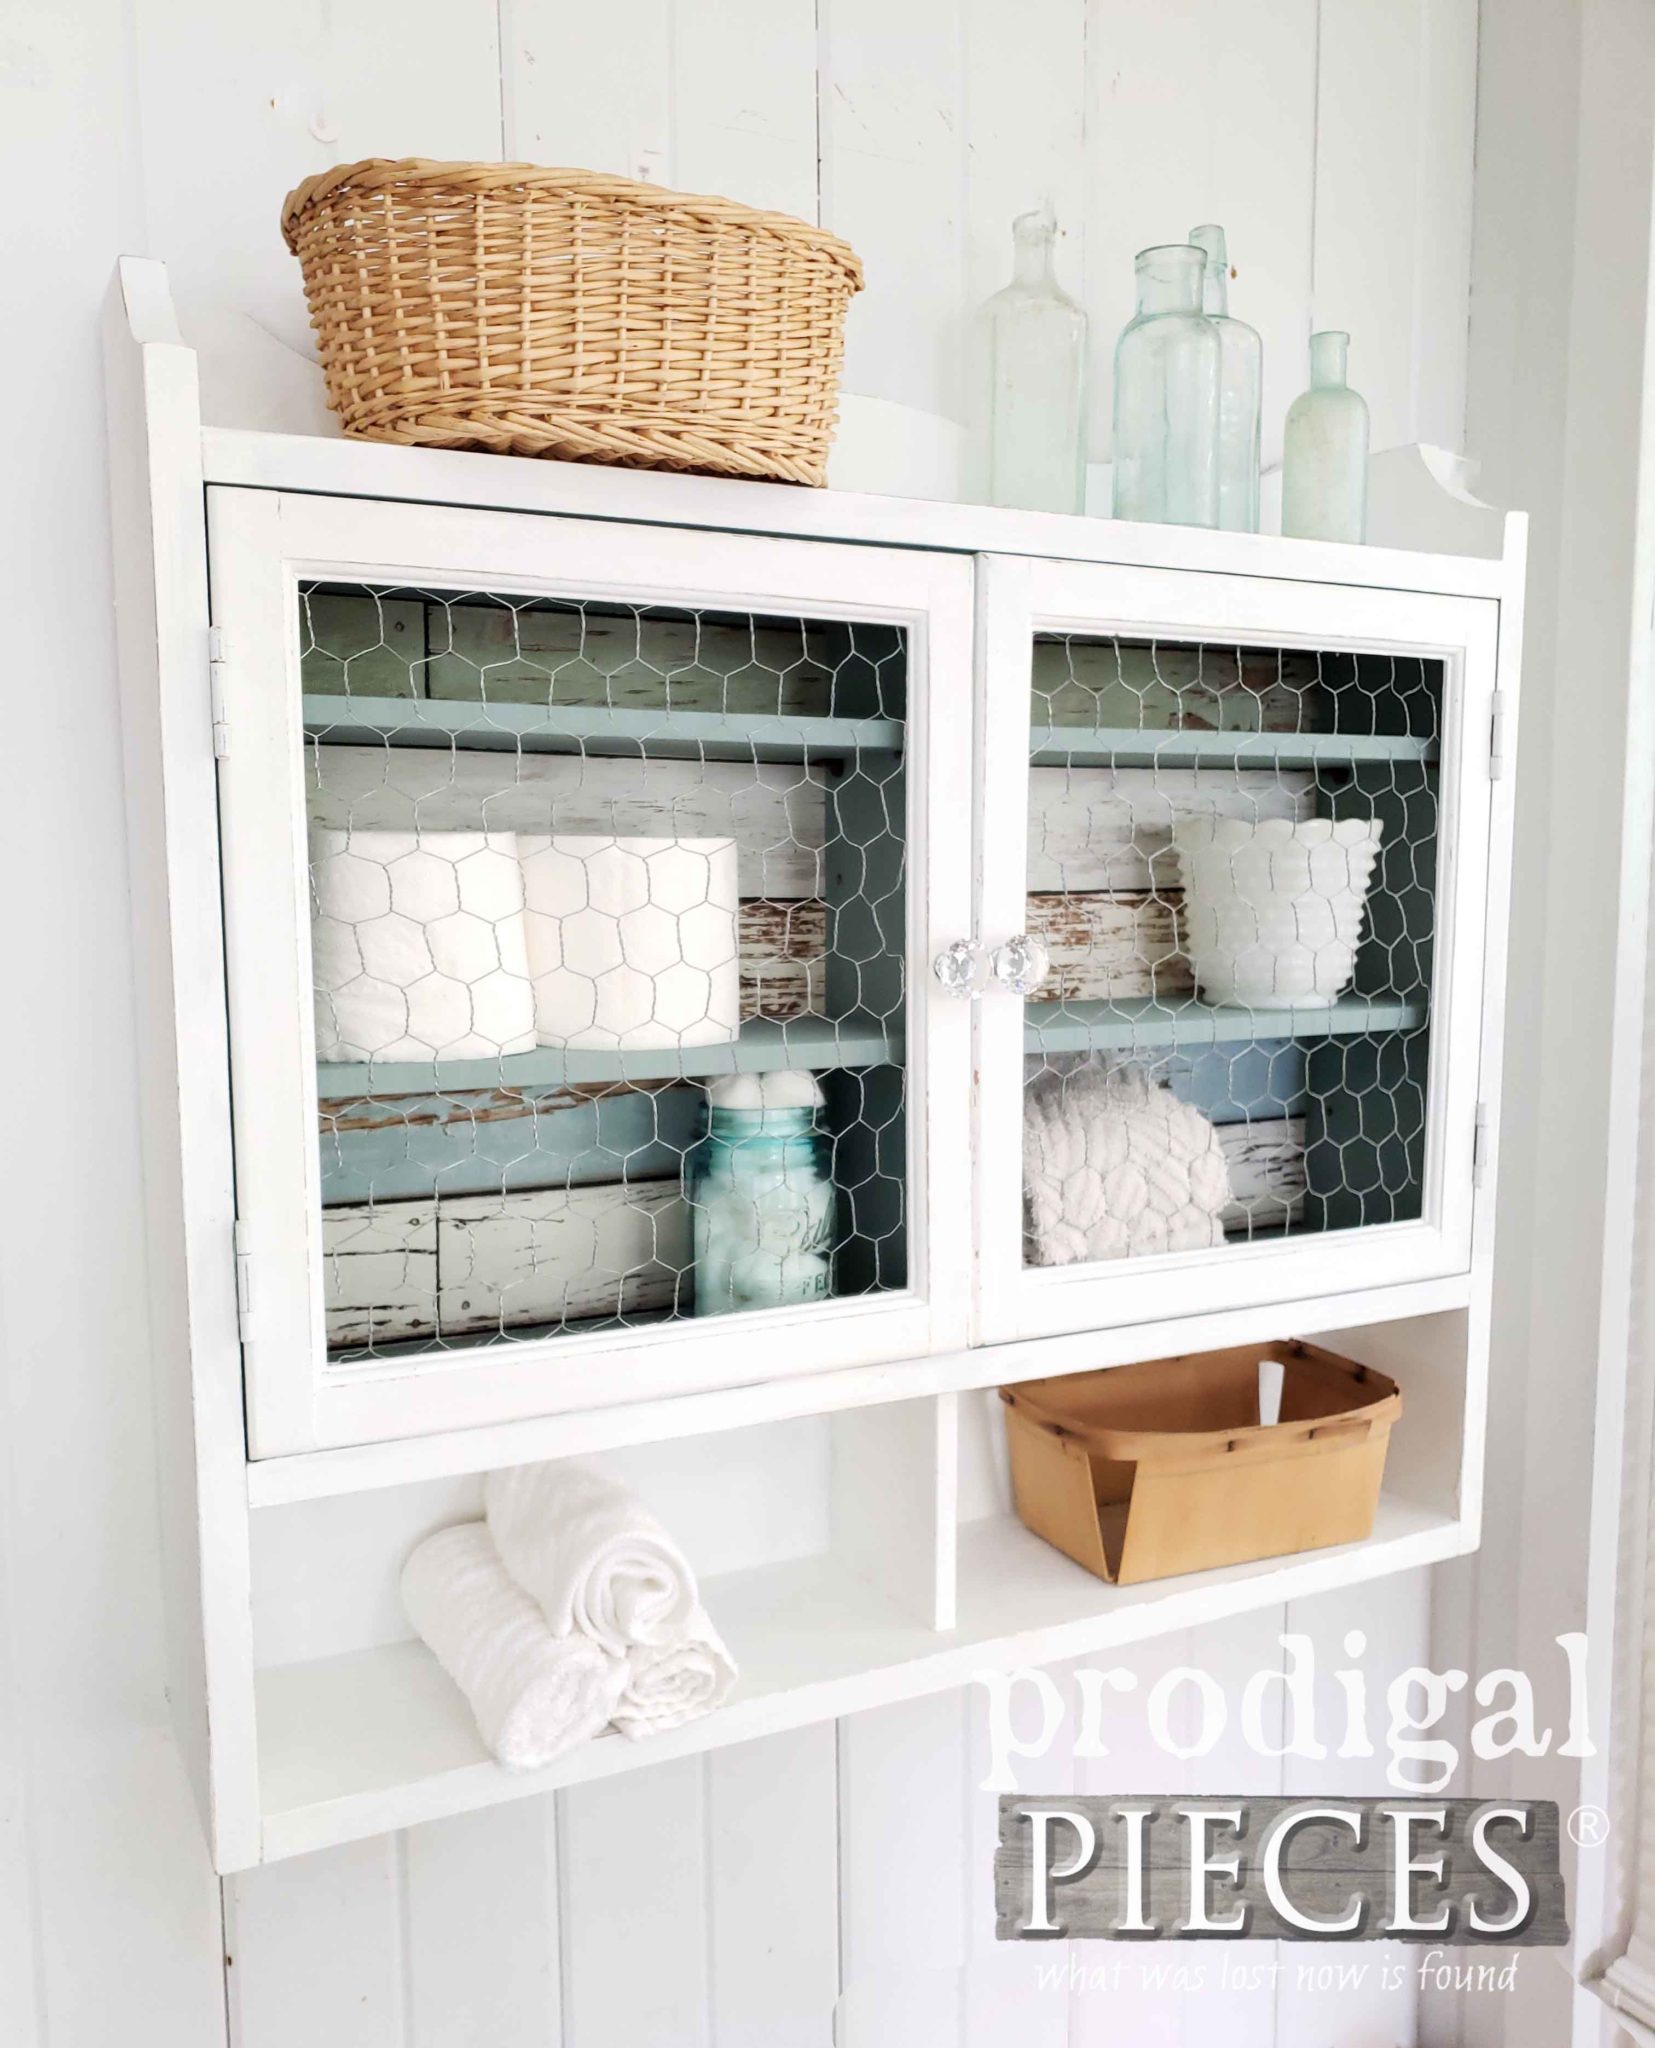 White Farmhouse Style Wall Cupboard from a Thrifted Medicine Cabinet by Larissa of Prodigal Pieces | prodigalpieces.com